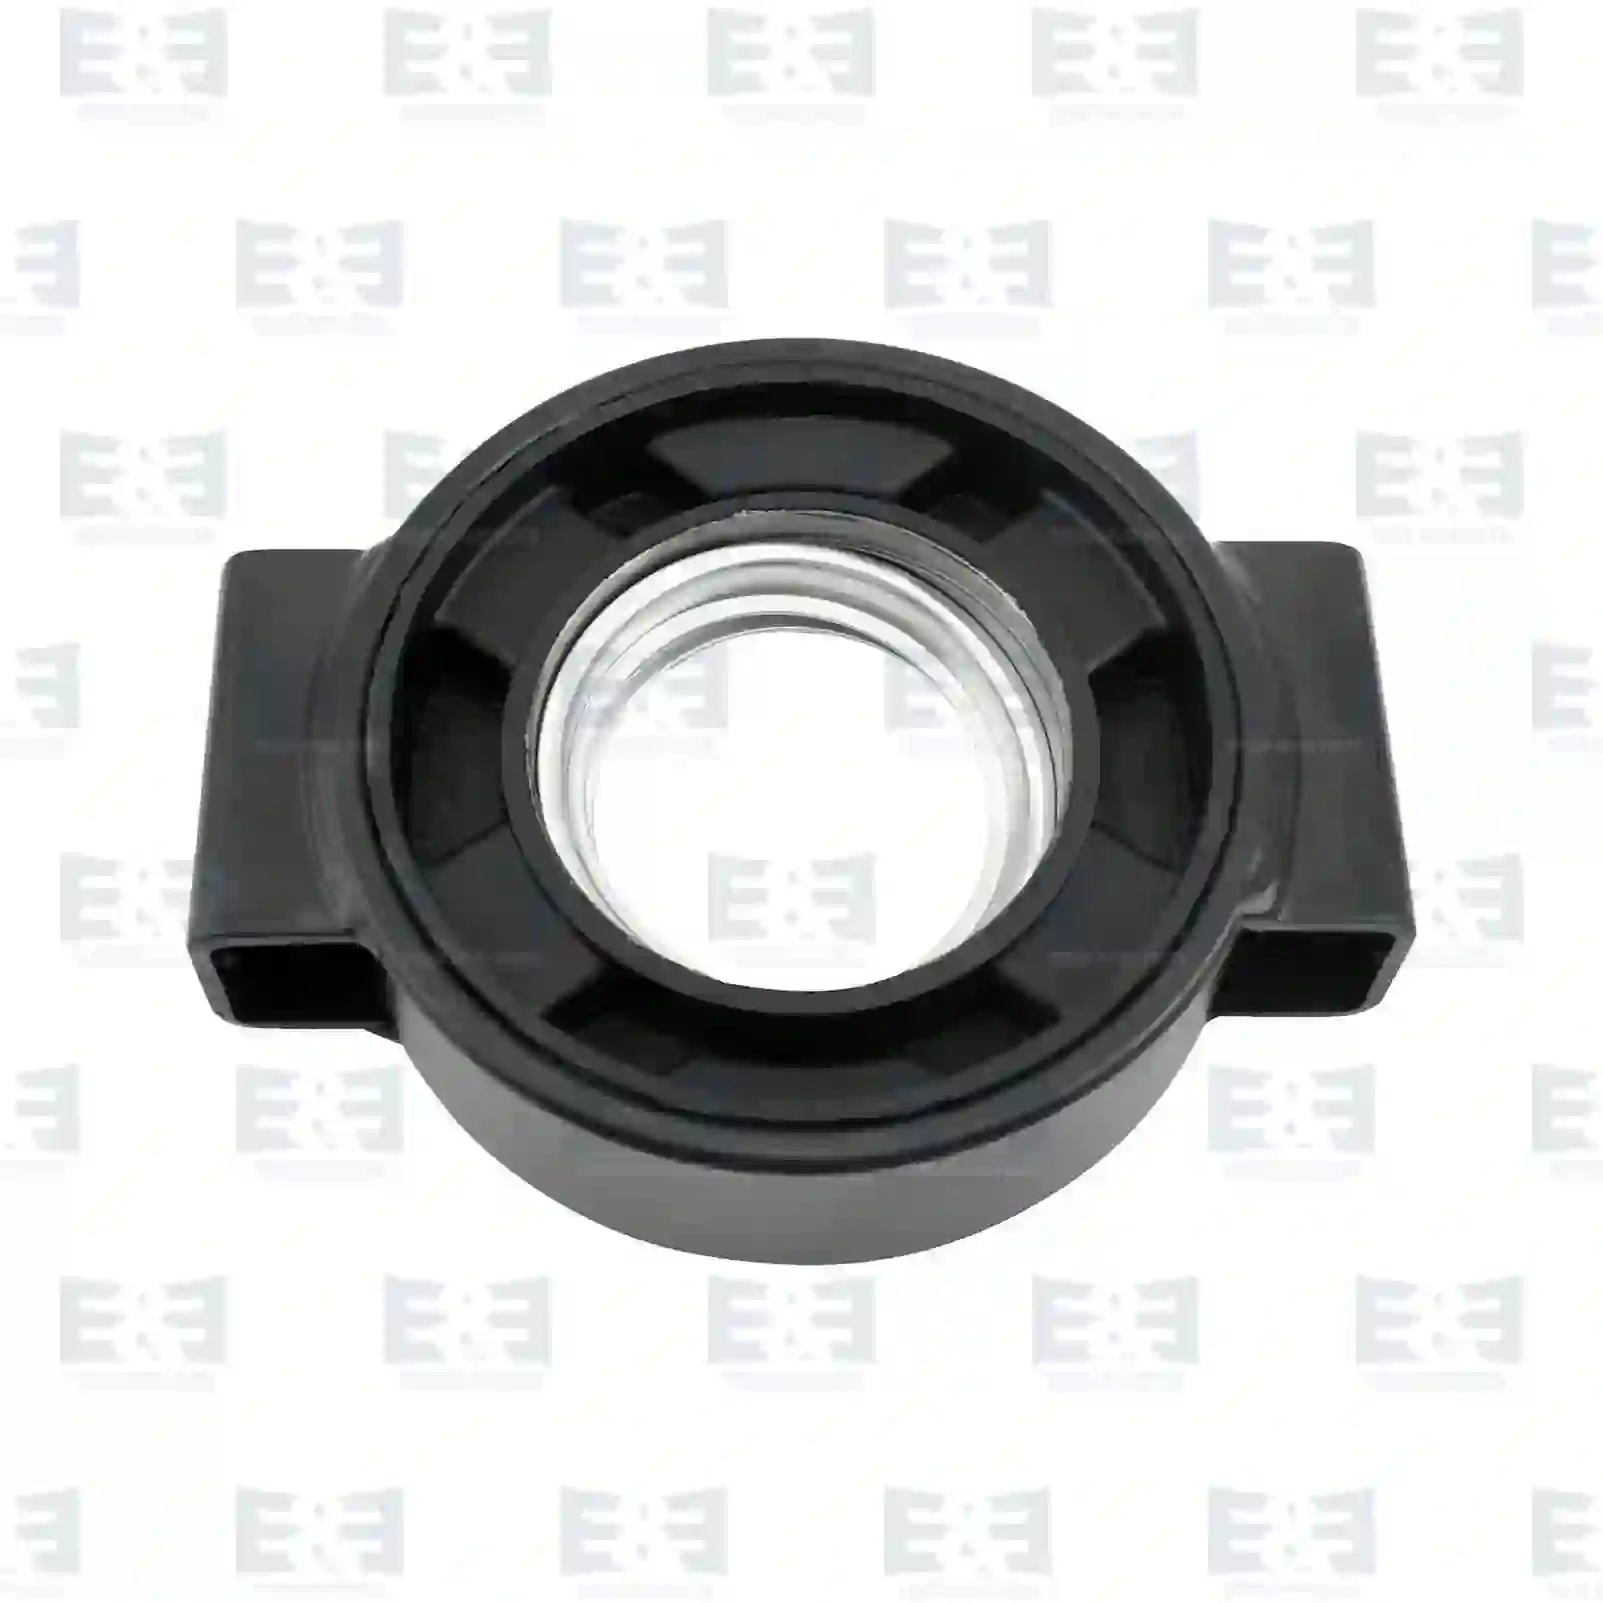  Center bearing, without ball bearing || E&E Truck Spare Parts | Truck Spare Parts, Auotomotive Spare Parts